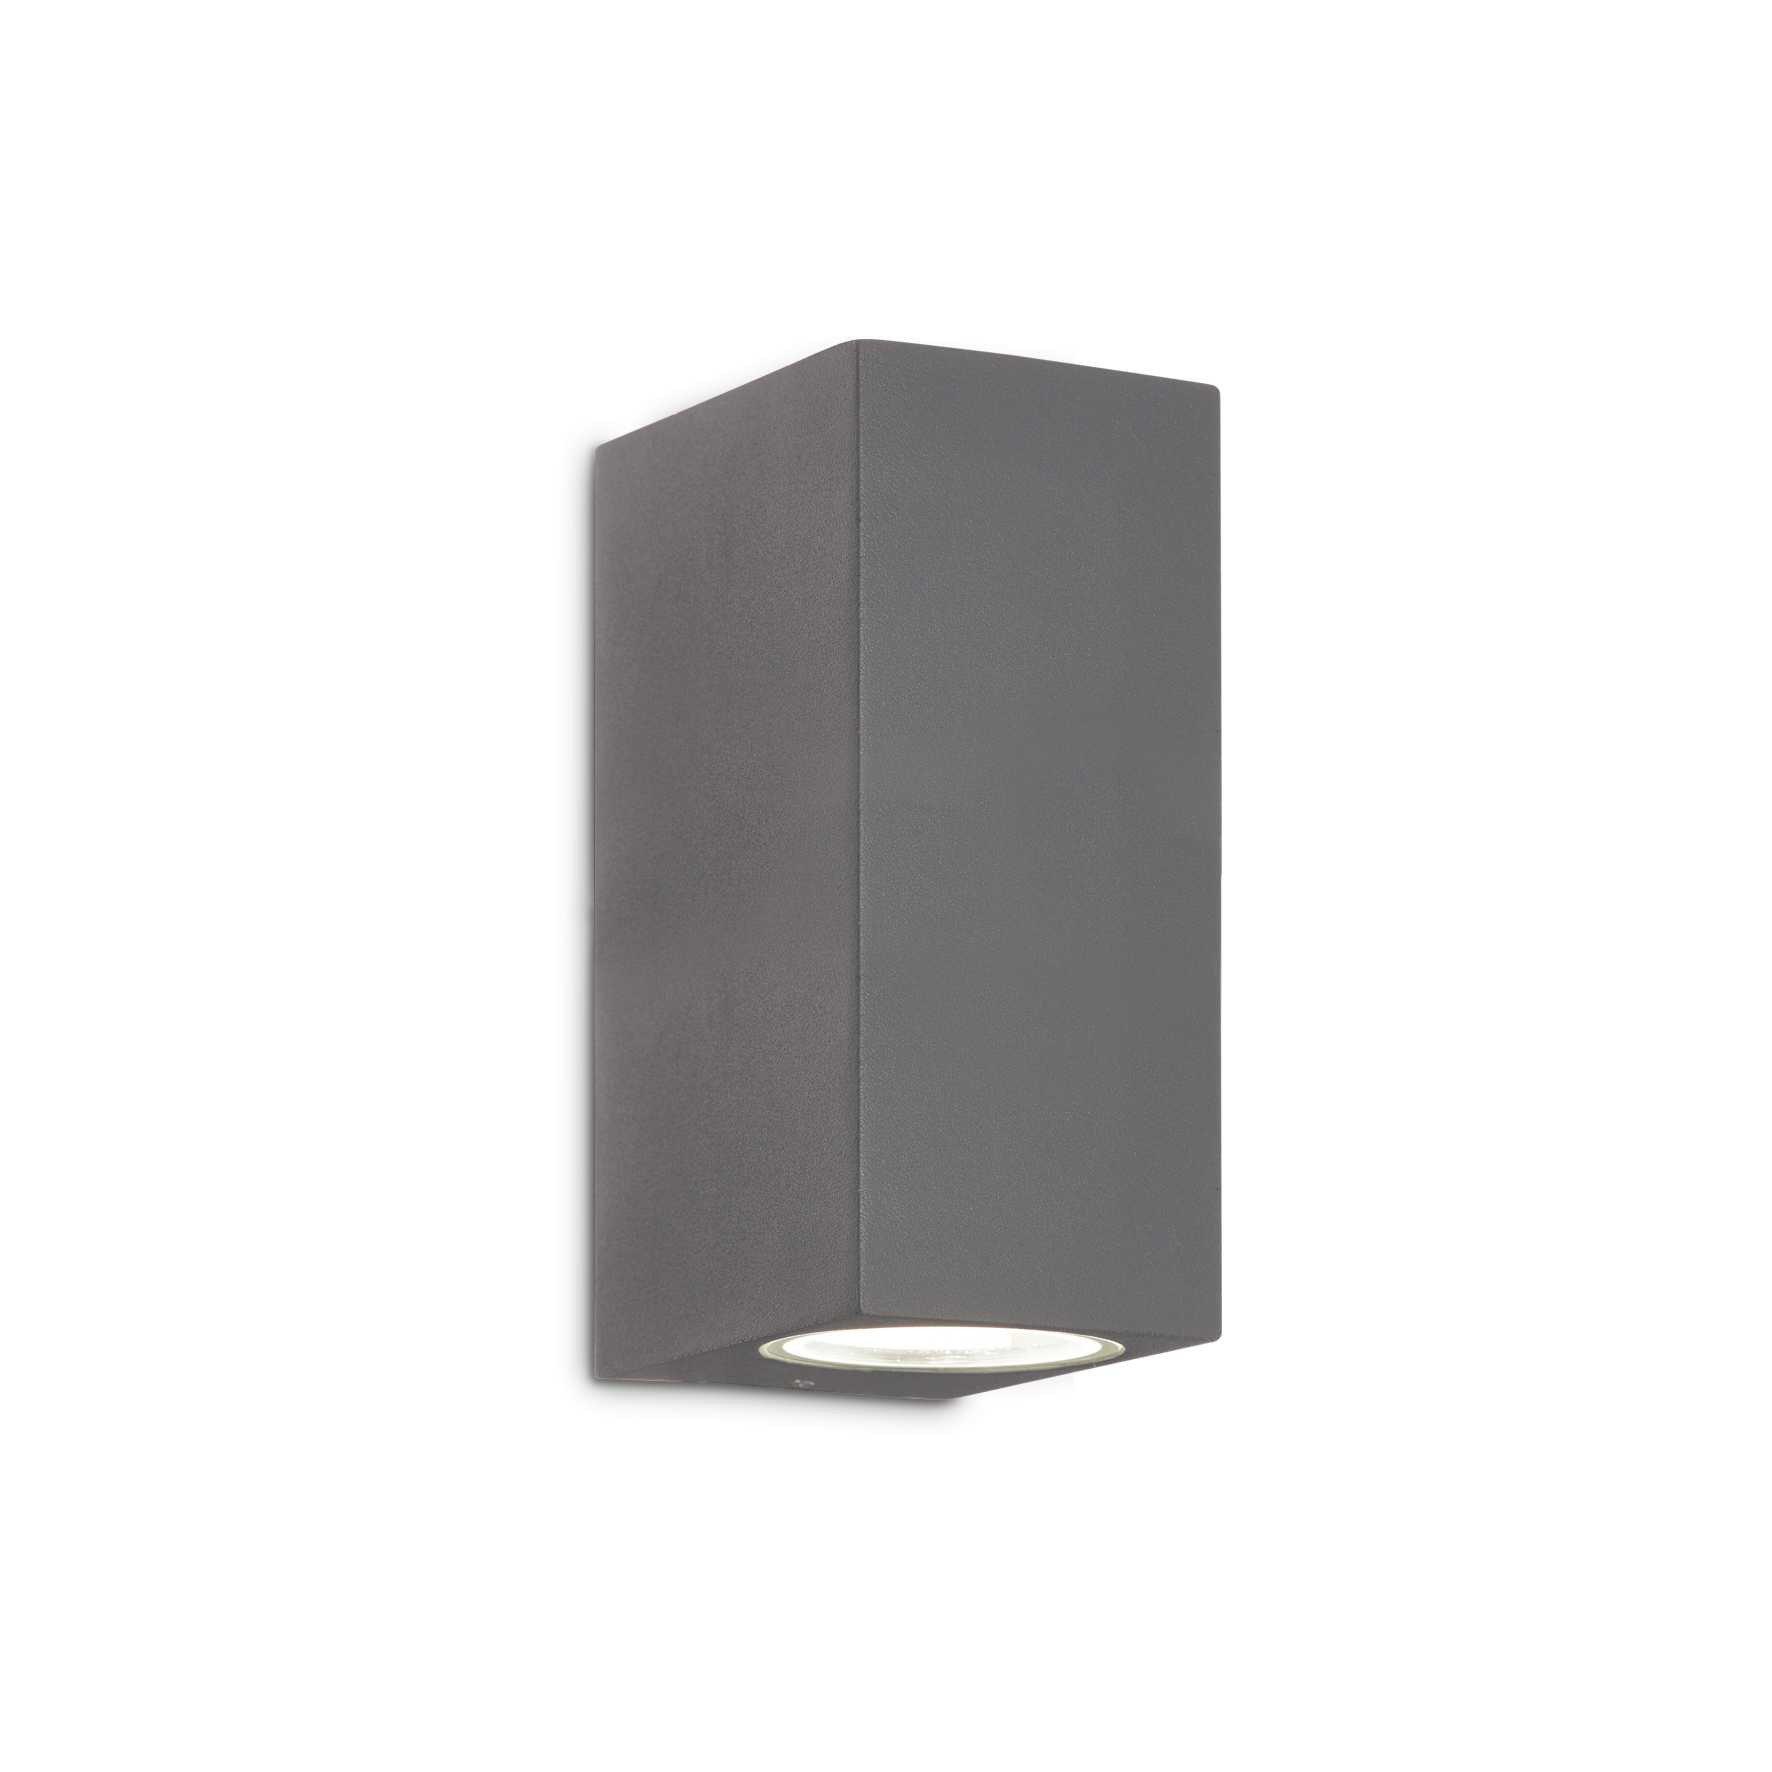 2 Light Outdoor Up Down Wall Light Anthracite IP44 G9